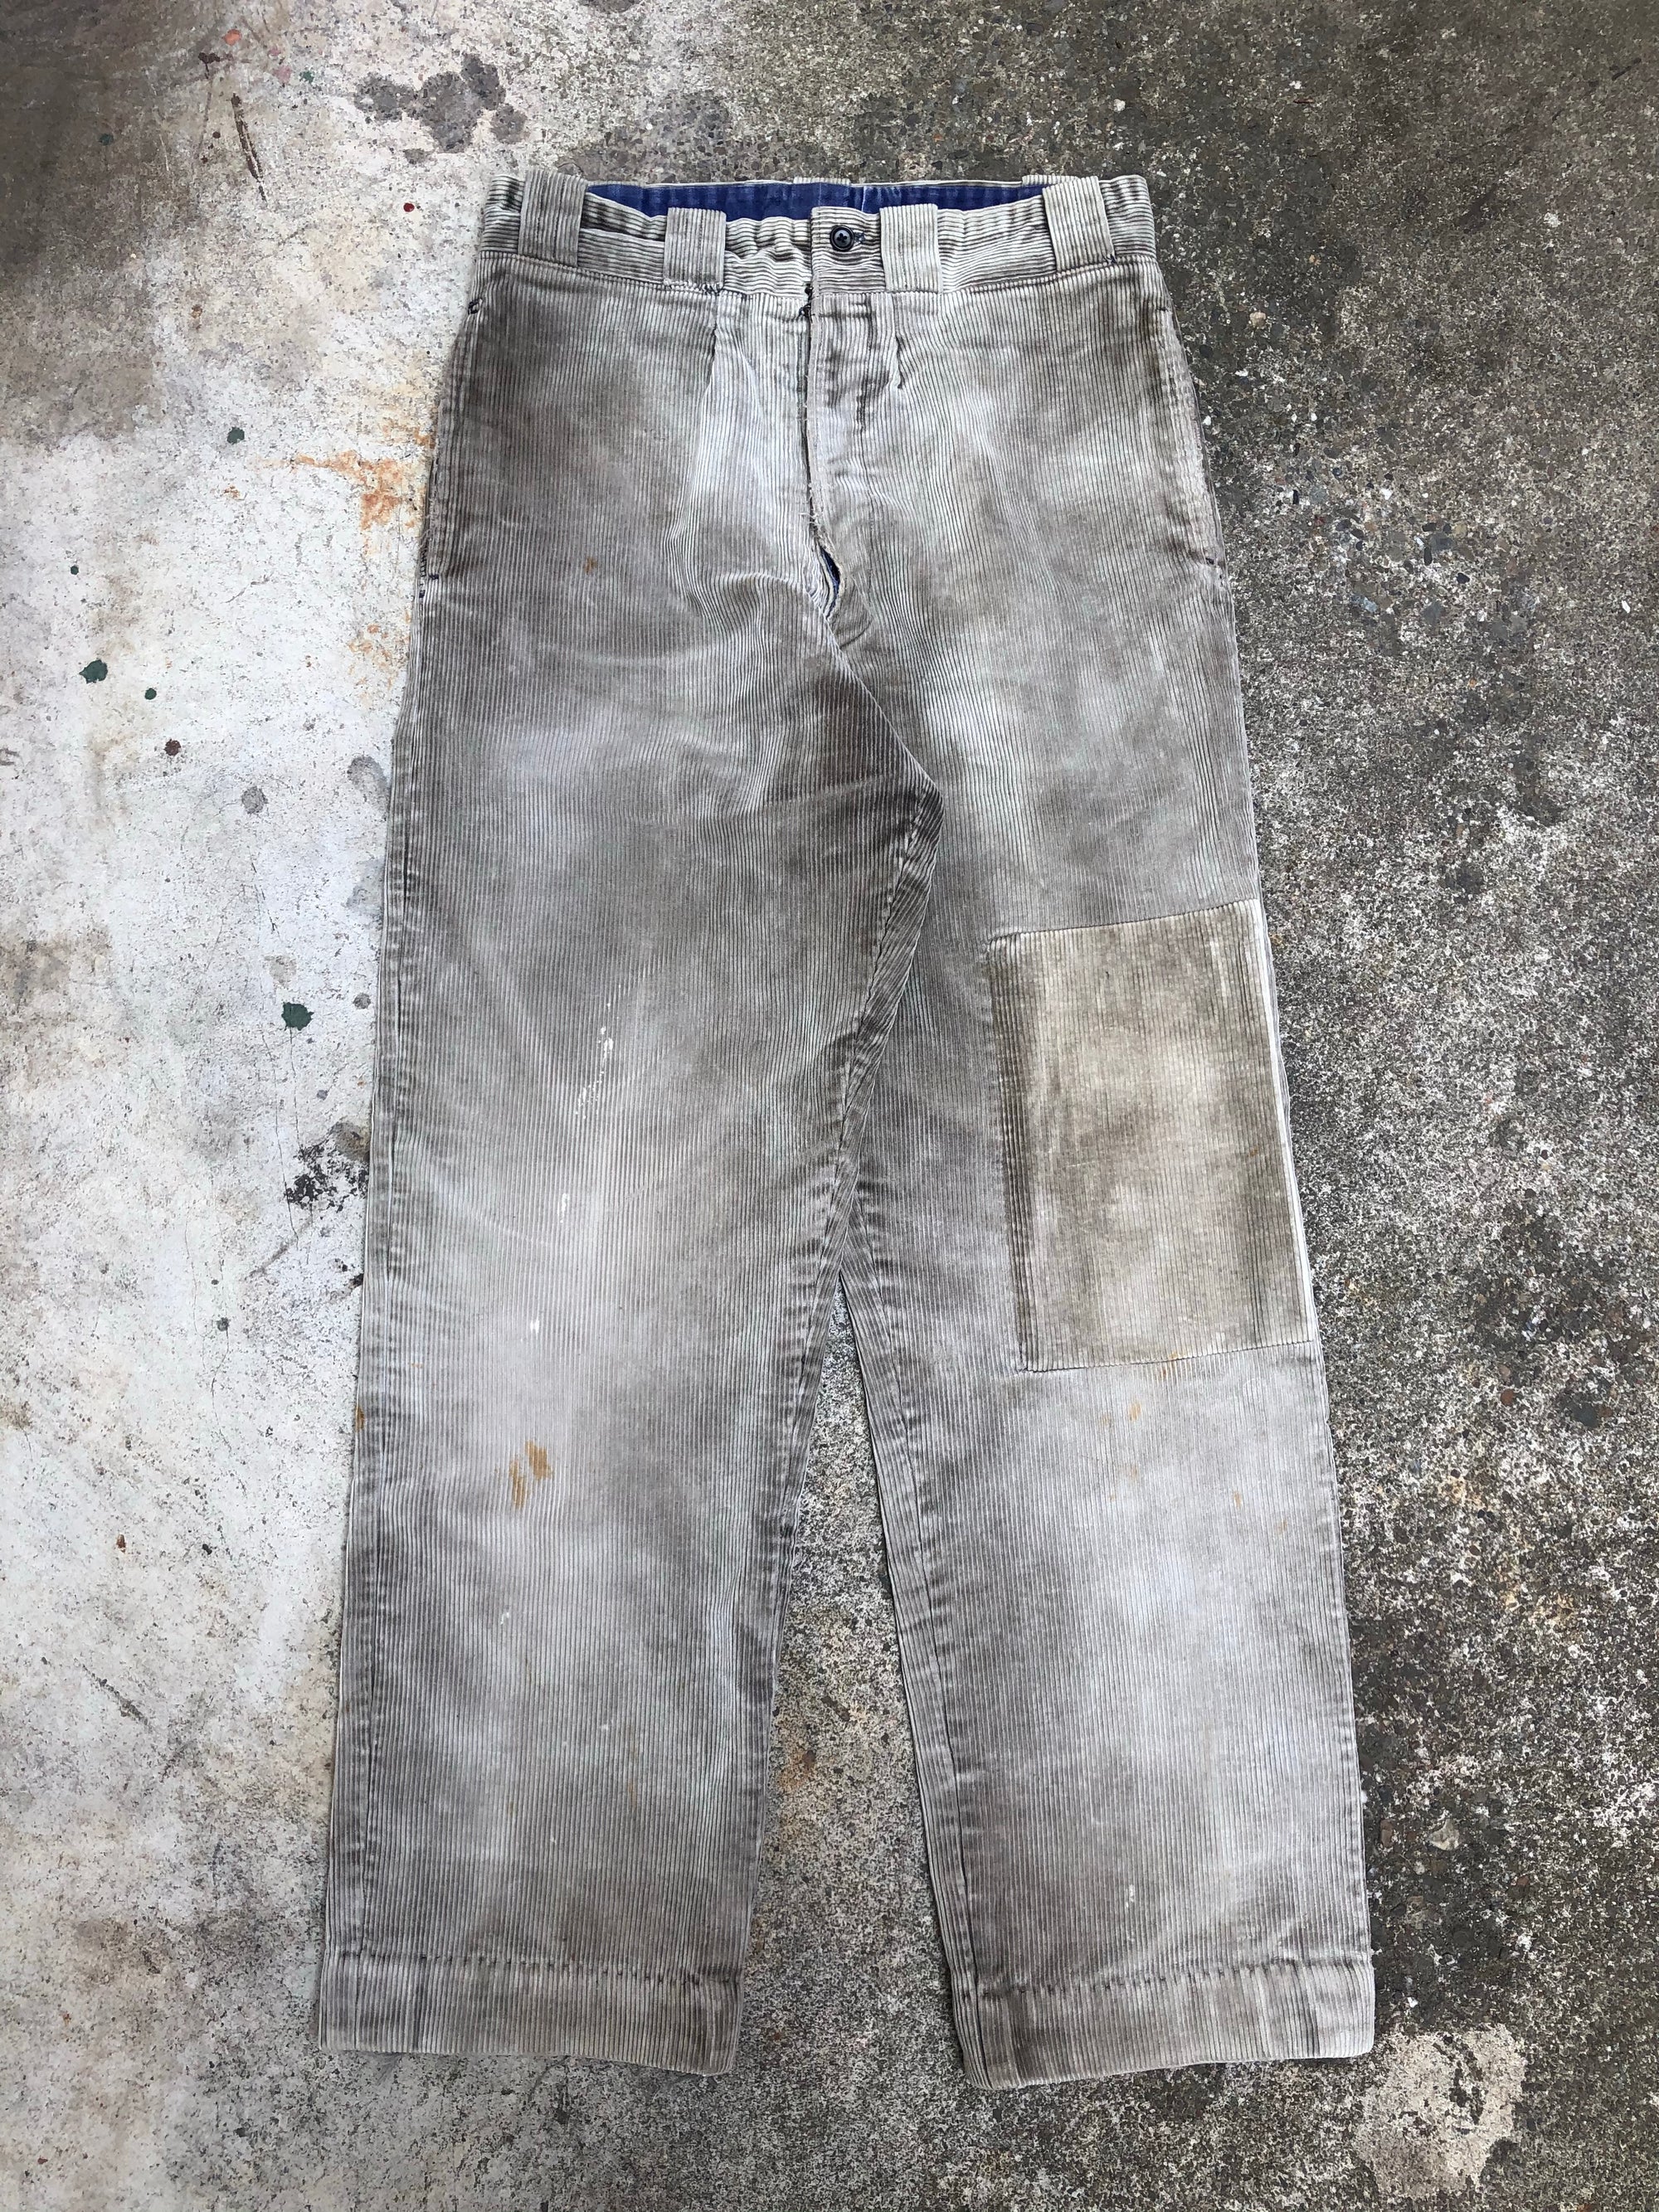 1940s/1950s French Corduroy Patched Work Pants (31X30)